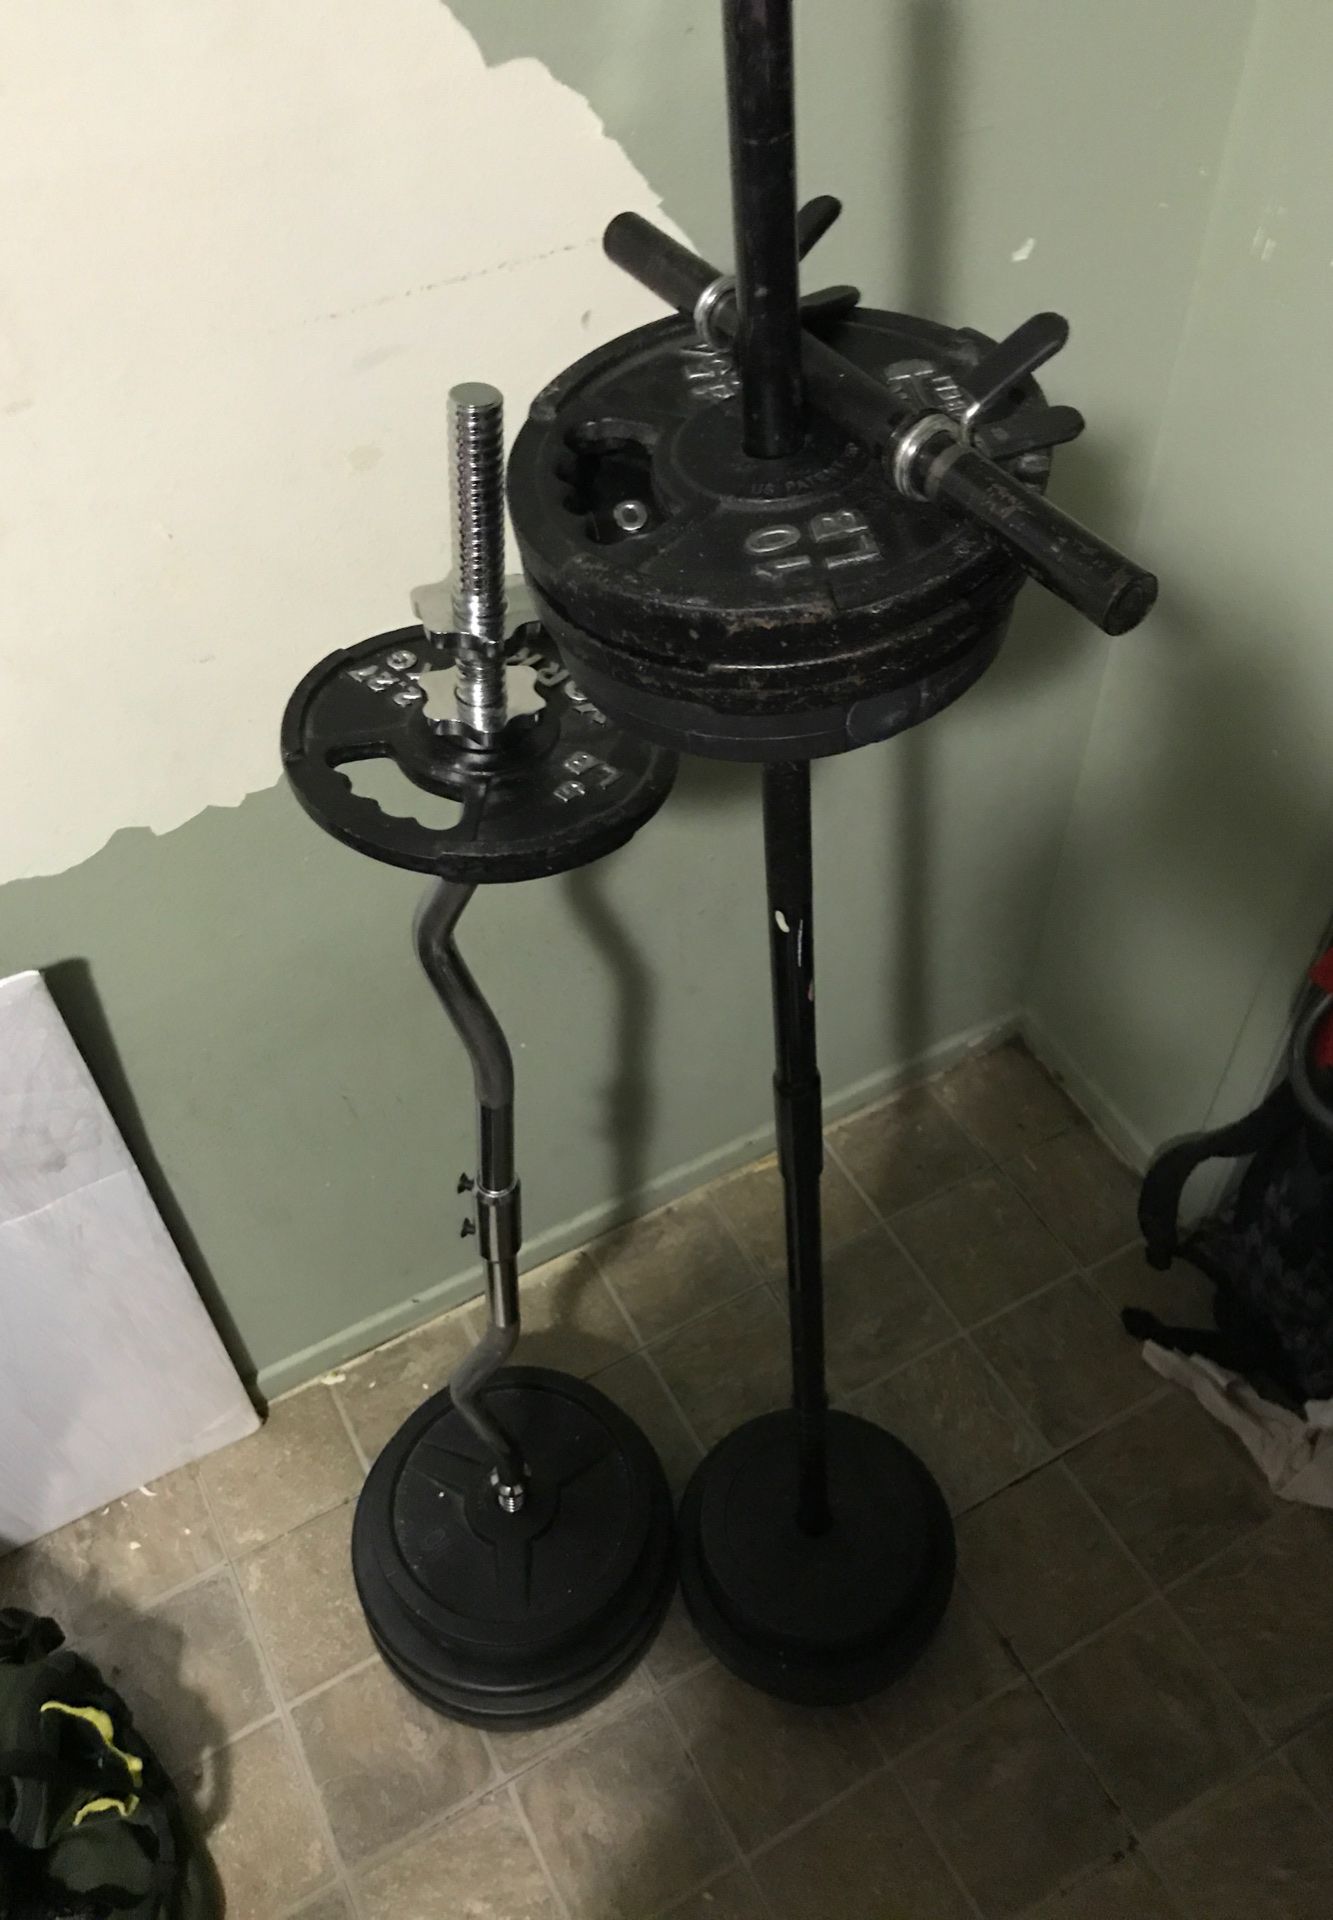 York Barbell weights